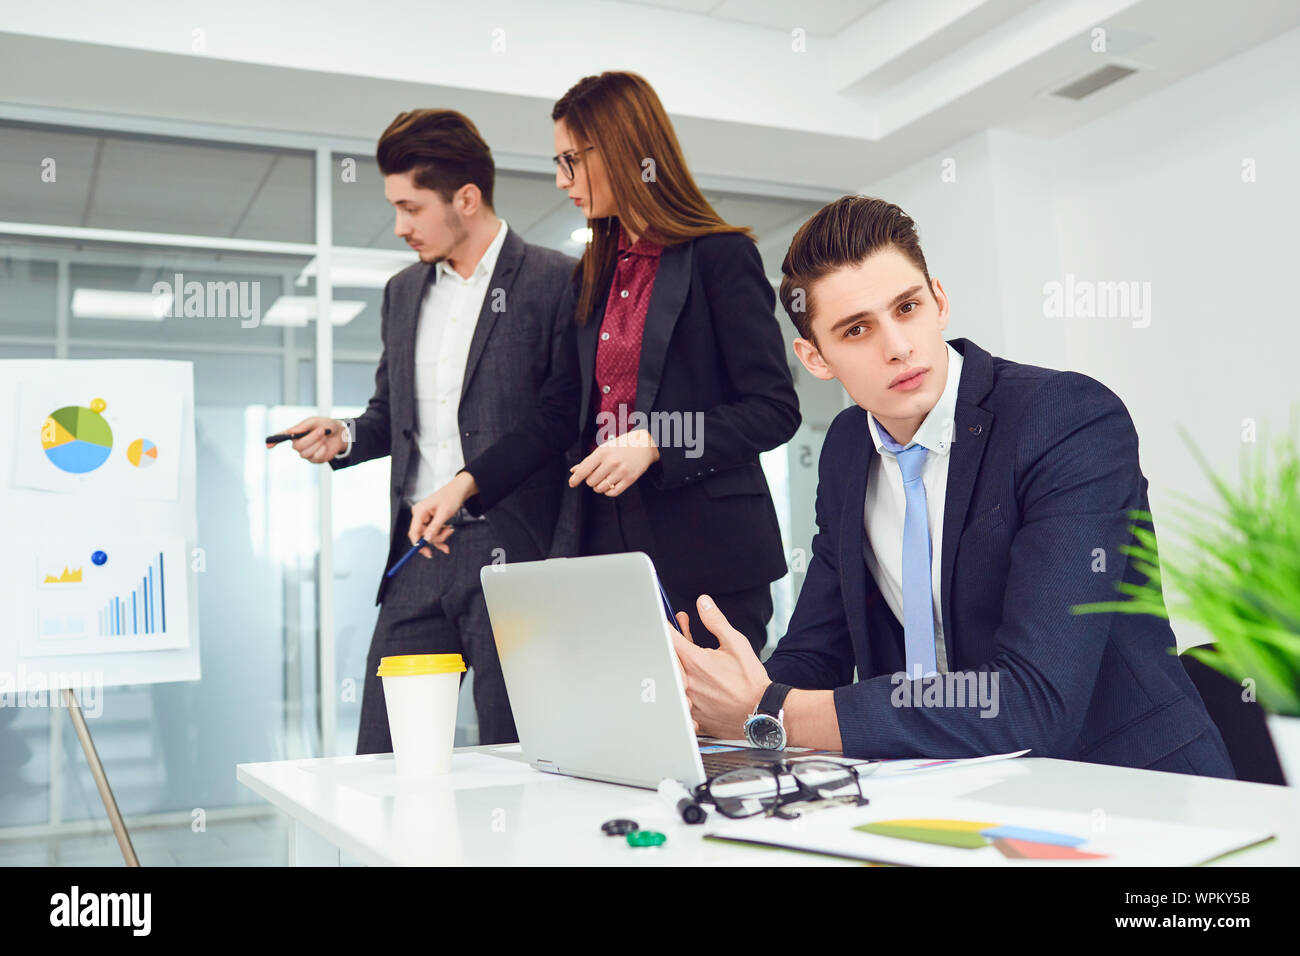 Serious young business people communicate at a table in an office. Stock Photo